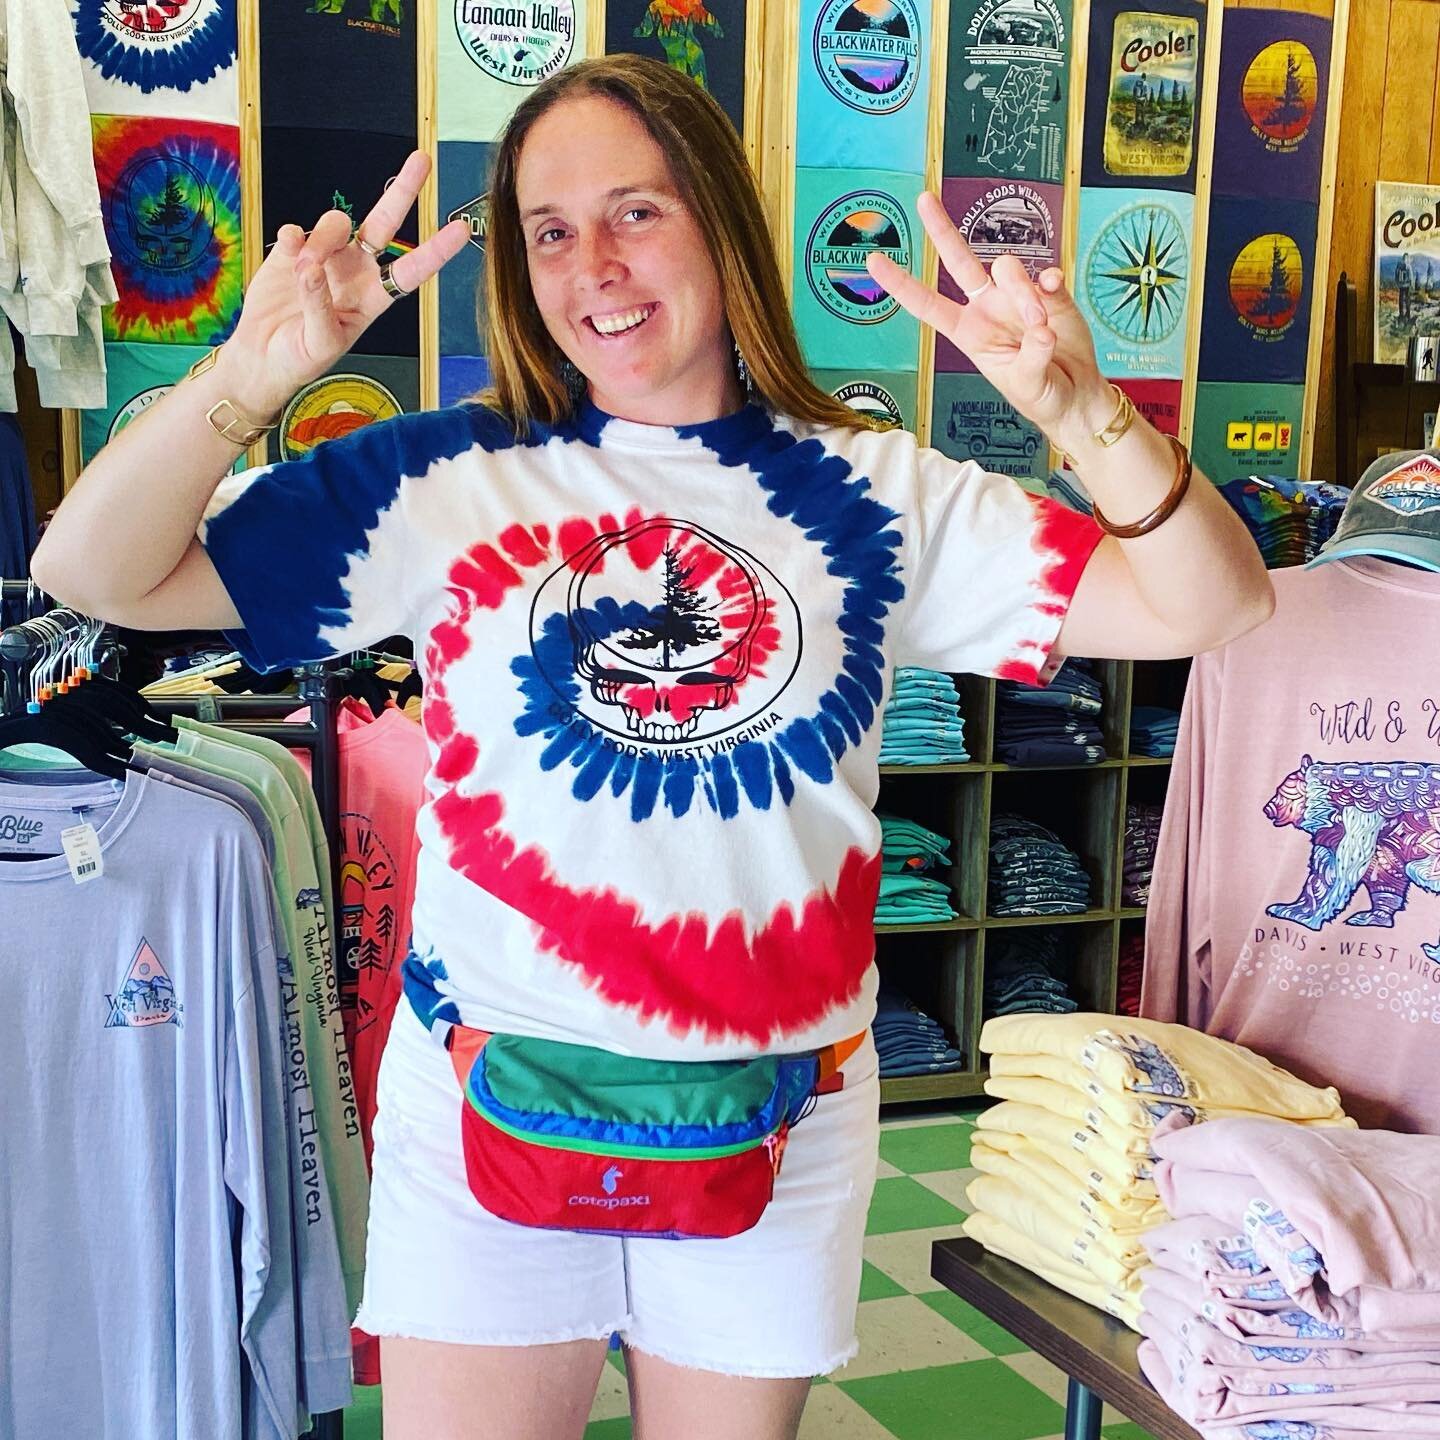 Happy birthday to America&hellip; and to Emay! L @emaymusic is here sporting our new RWB &ldquo;steal your sods&rdquo; tee! Come get one for yourself - we are open daily! And have a great Independence Day! 🎇